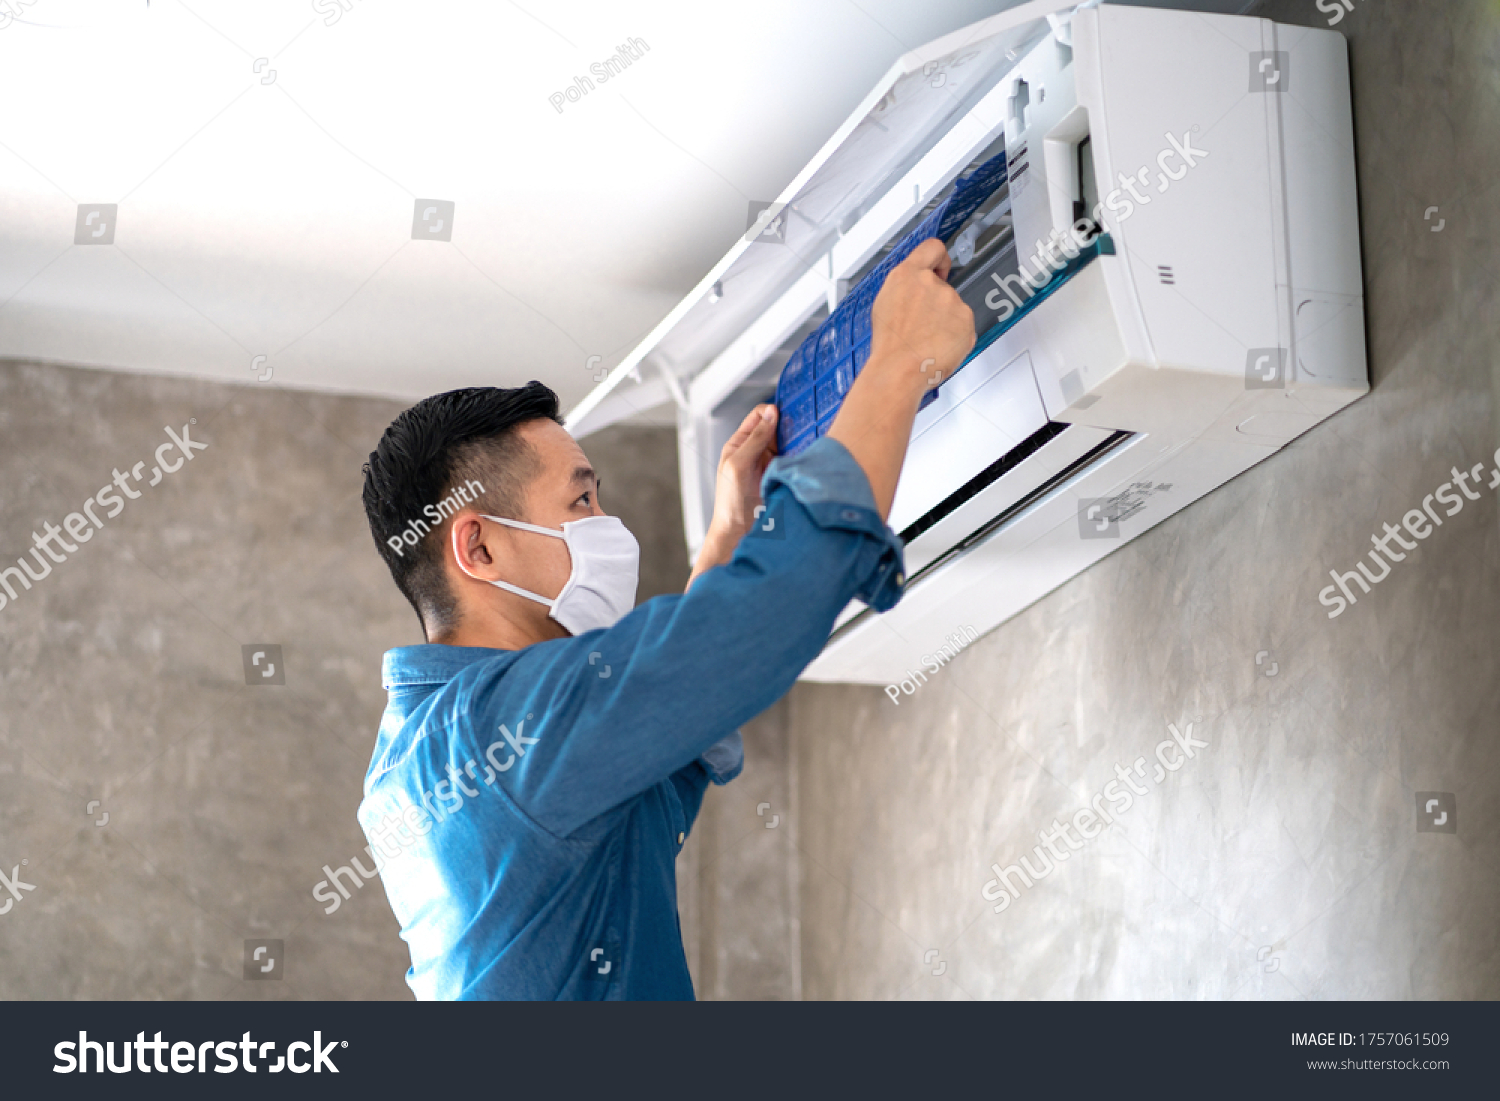 Technician man repairing ,cleaning and maintenance Air conditioner on the wall in bedroom or office room.On site home service,Business ,Industrial concept. #1757061509